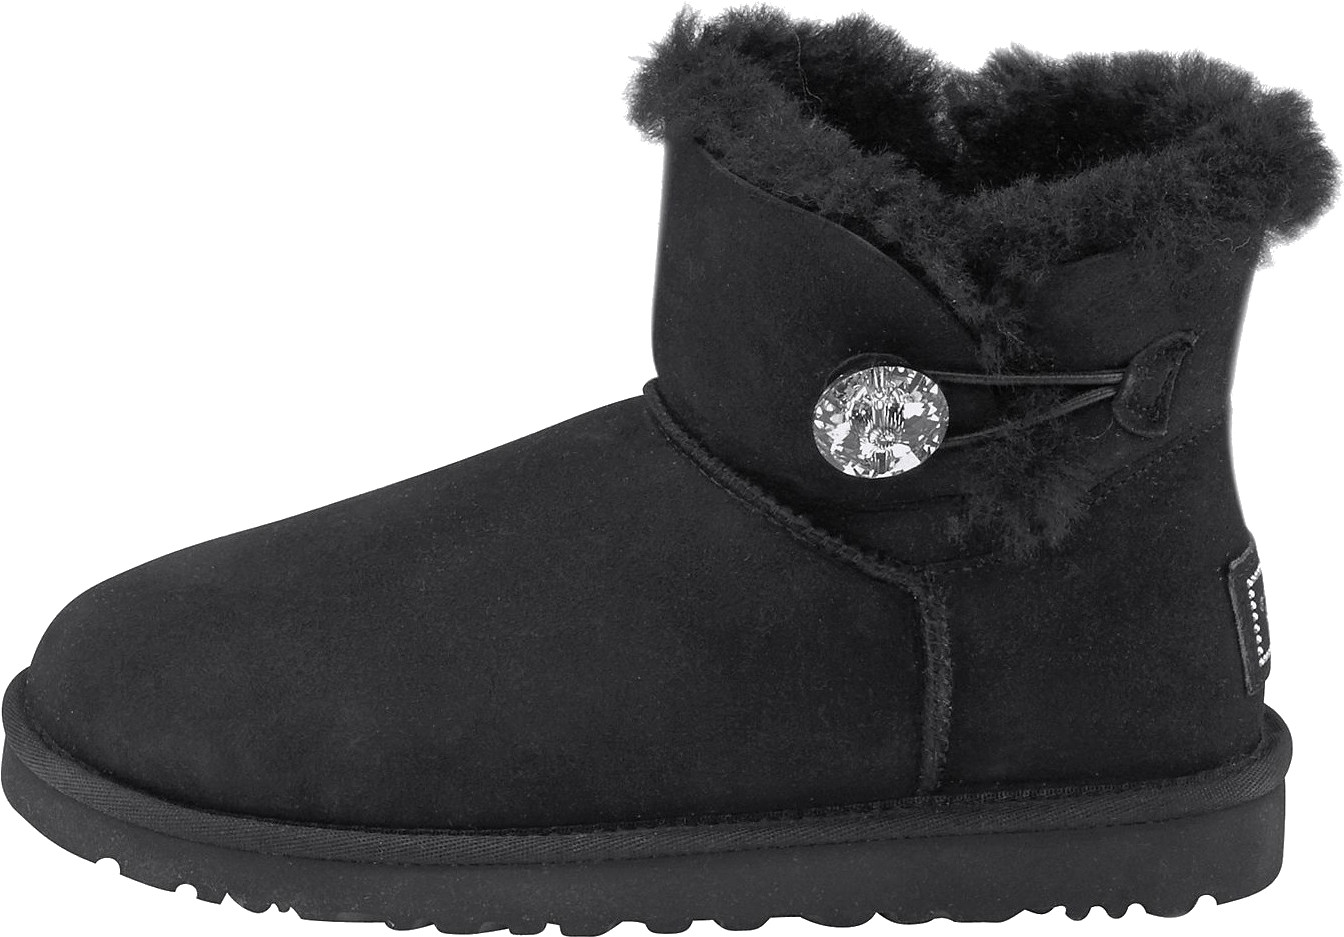 Buy Ugg Mini Bailey Button Bling Black From £110 00 Today Best Deals On Uk